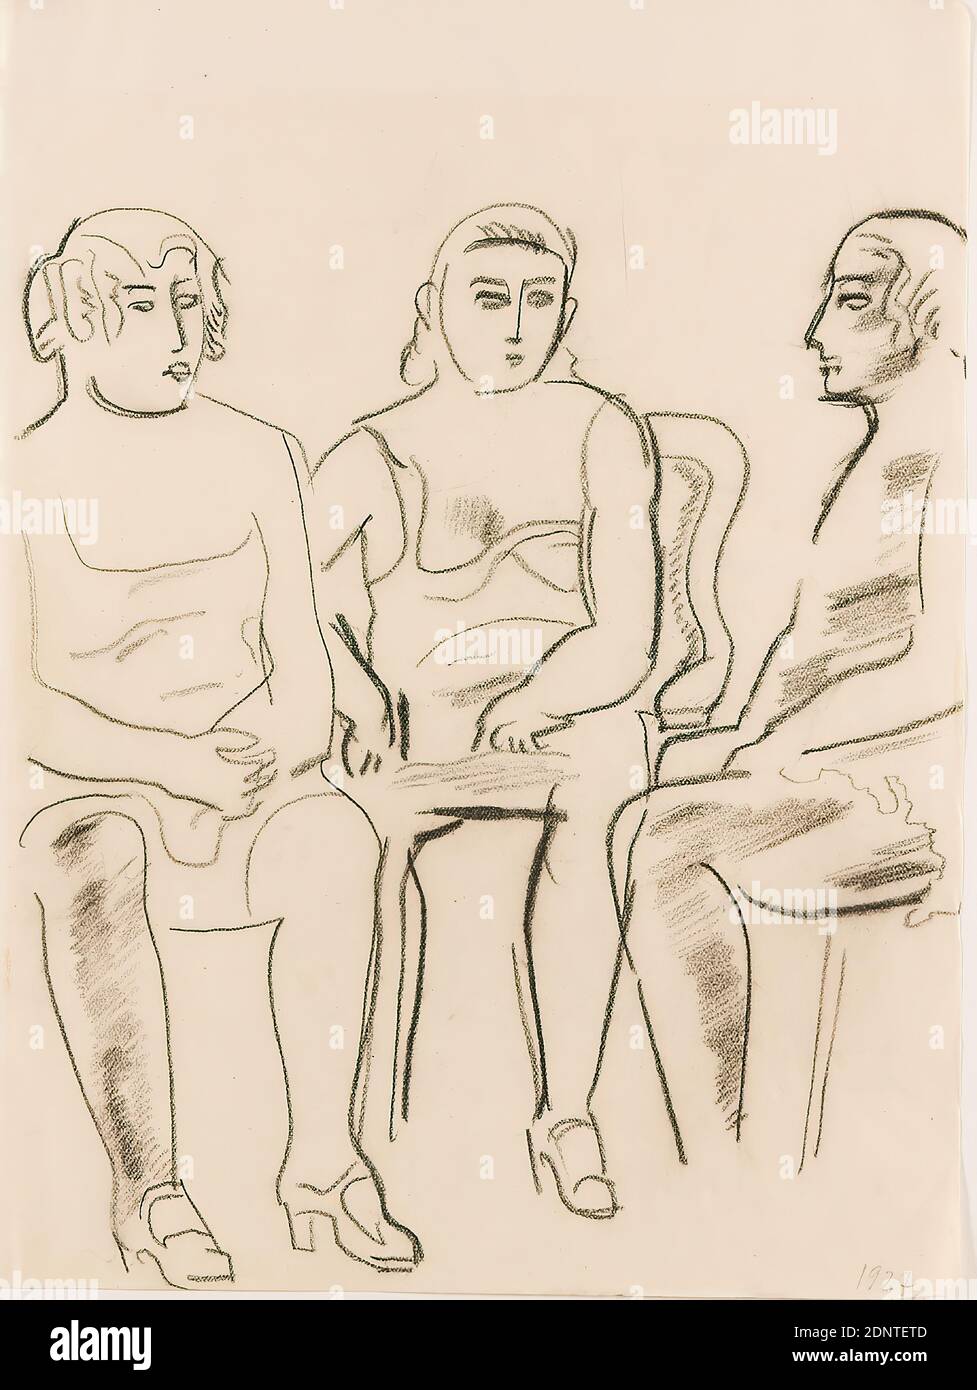 Gustav Heinrich Wolff, Three seated women in undergarments, drawing paper, drawing charcoal, drawing, charcoal on drawing paper, Total: Height: 26,9 cm; Width: 20,1 cm, drawing, graphics, sketches, seated figure, woman, entertainment, conversation, dialogue, classical modernism, Three women seated in undergarments on chairs in a semicircle, from the sketchbook 1927 Stock Photo